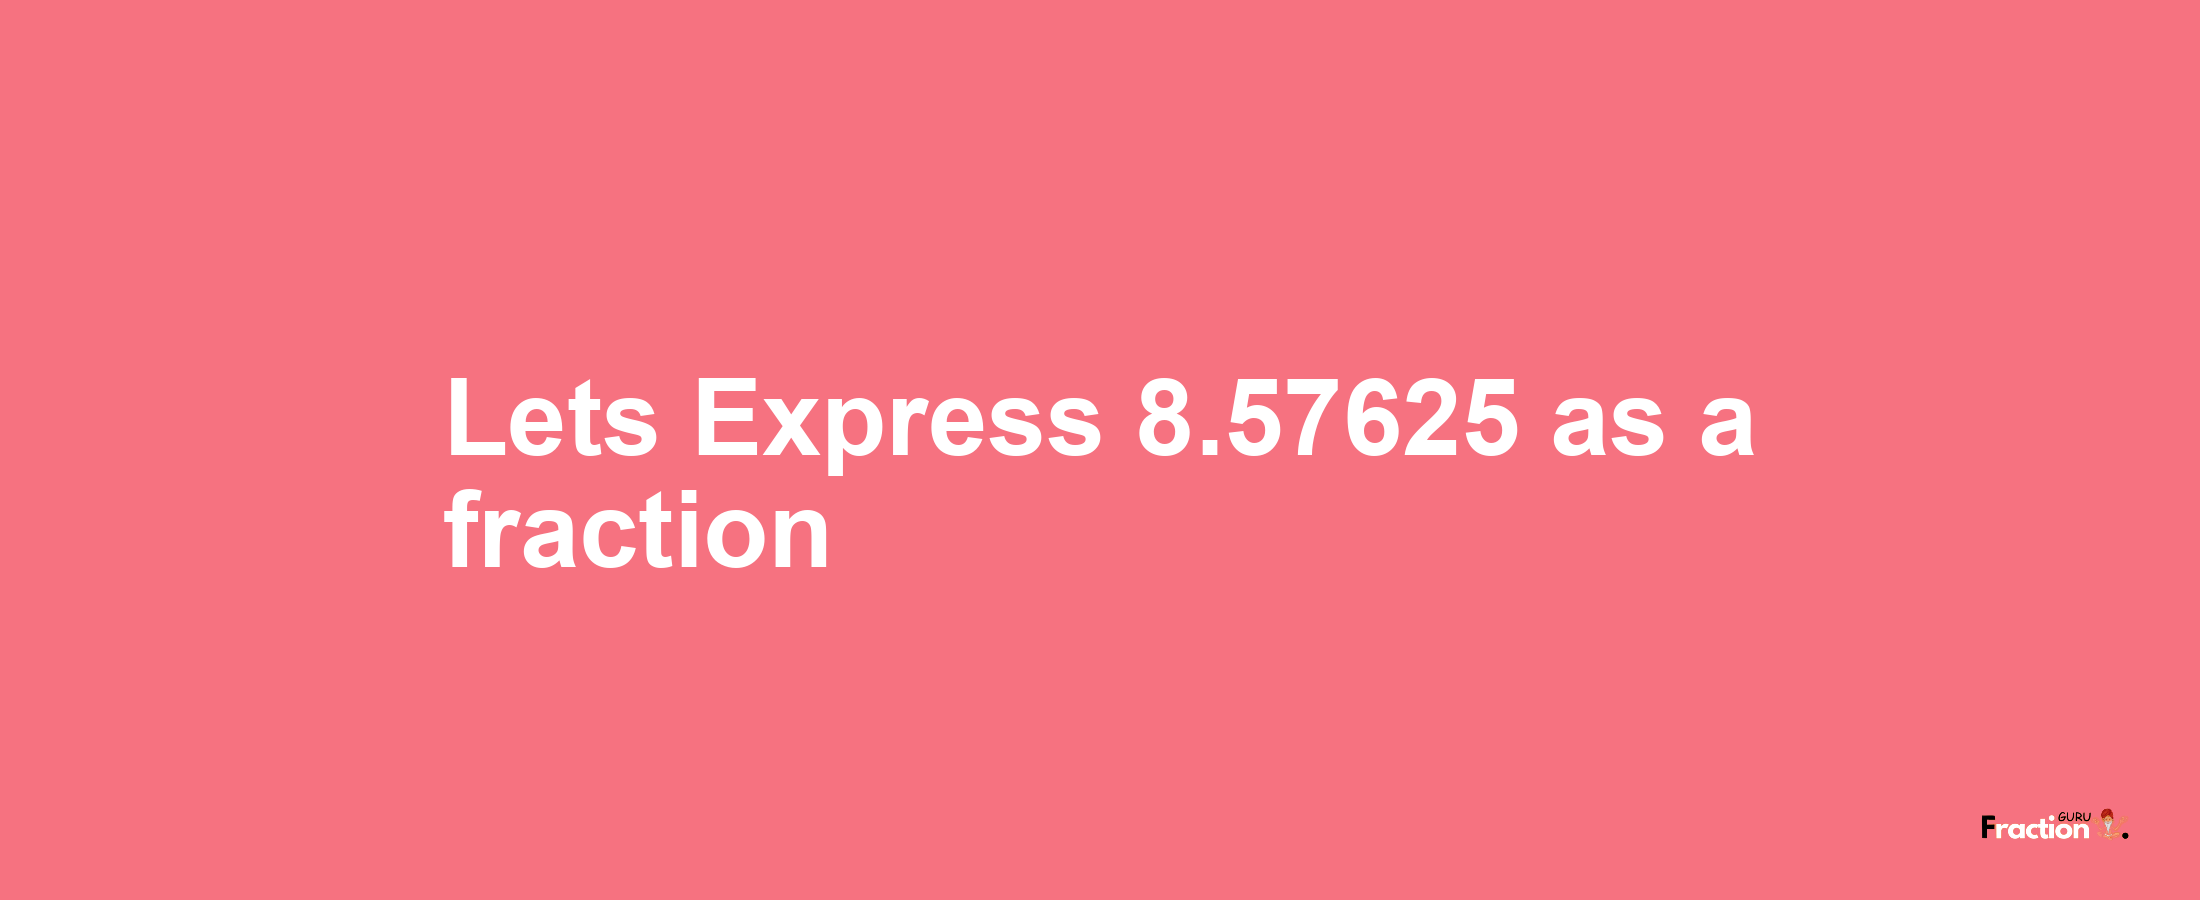 Lets Express 8.57625 as afraction